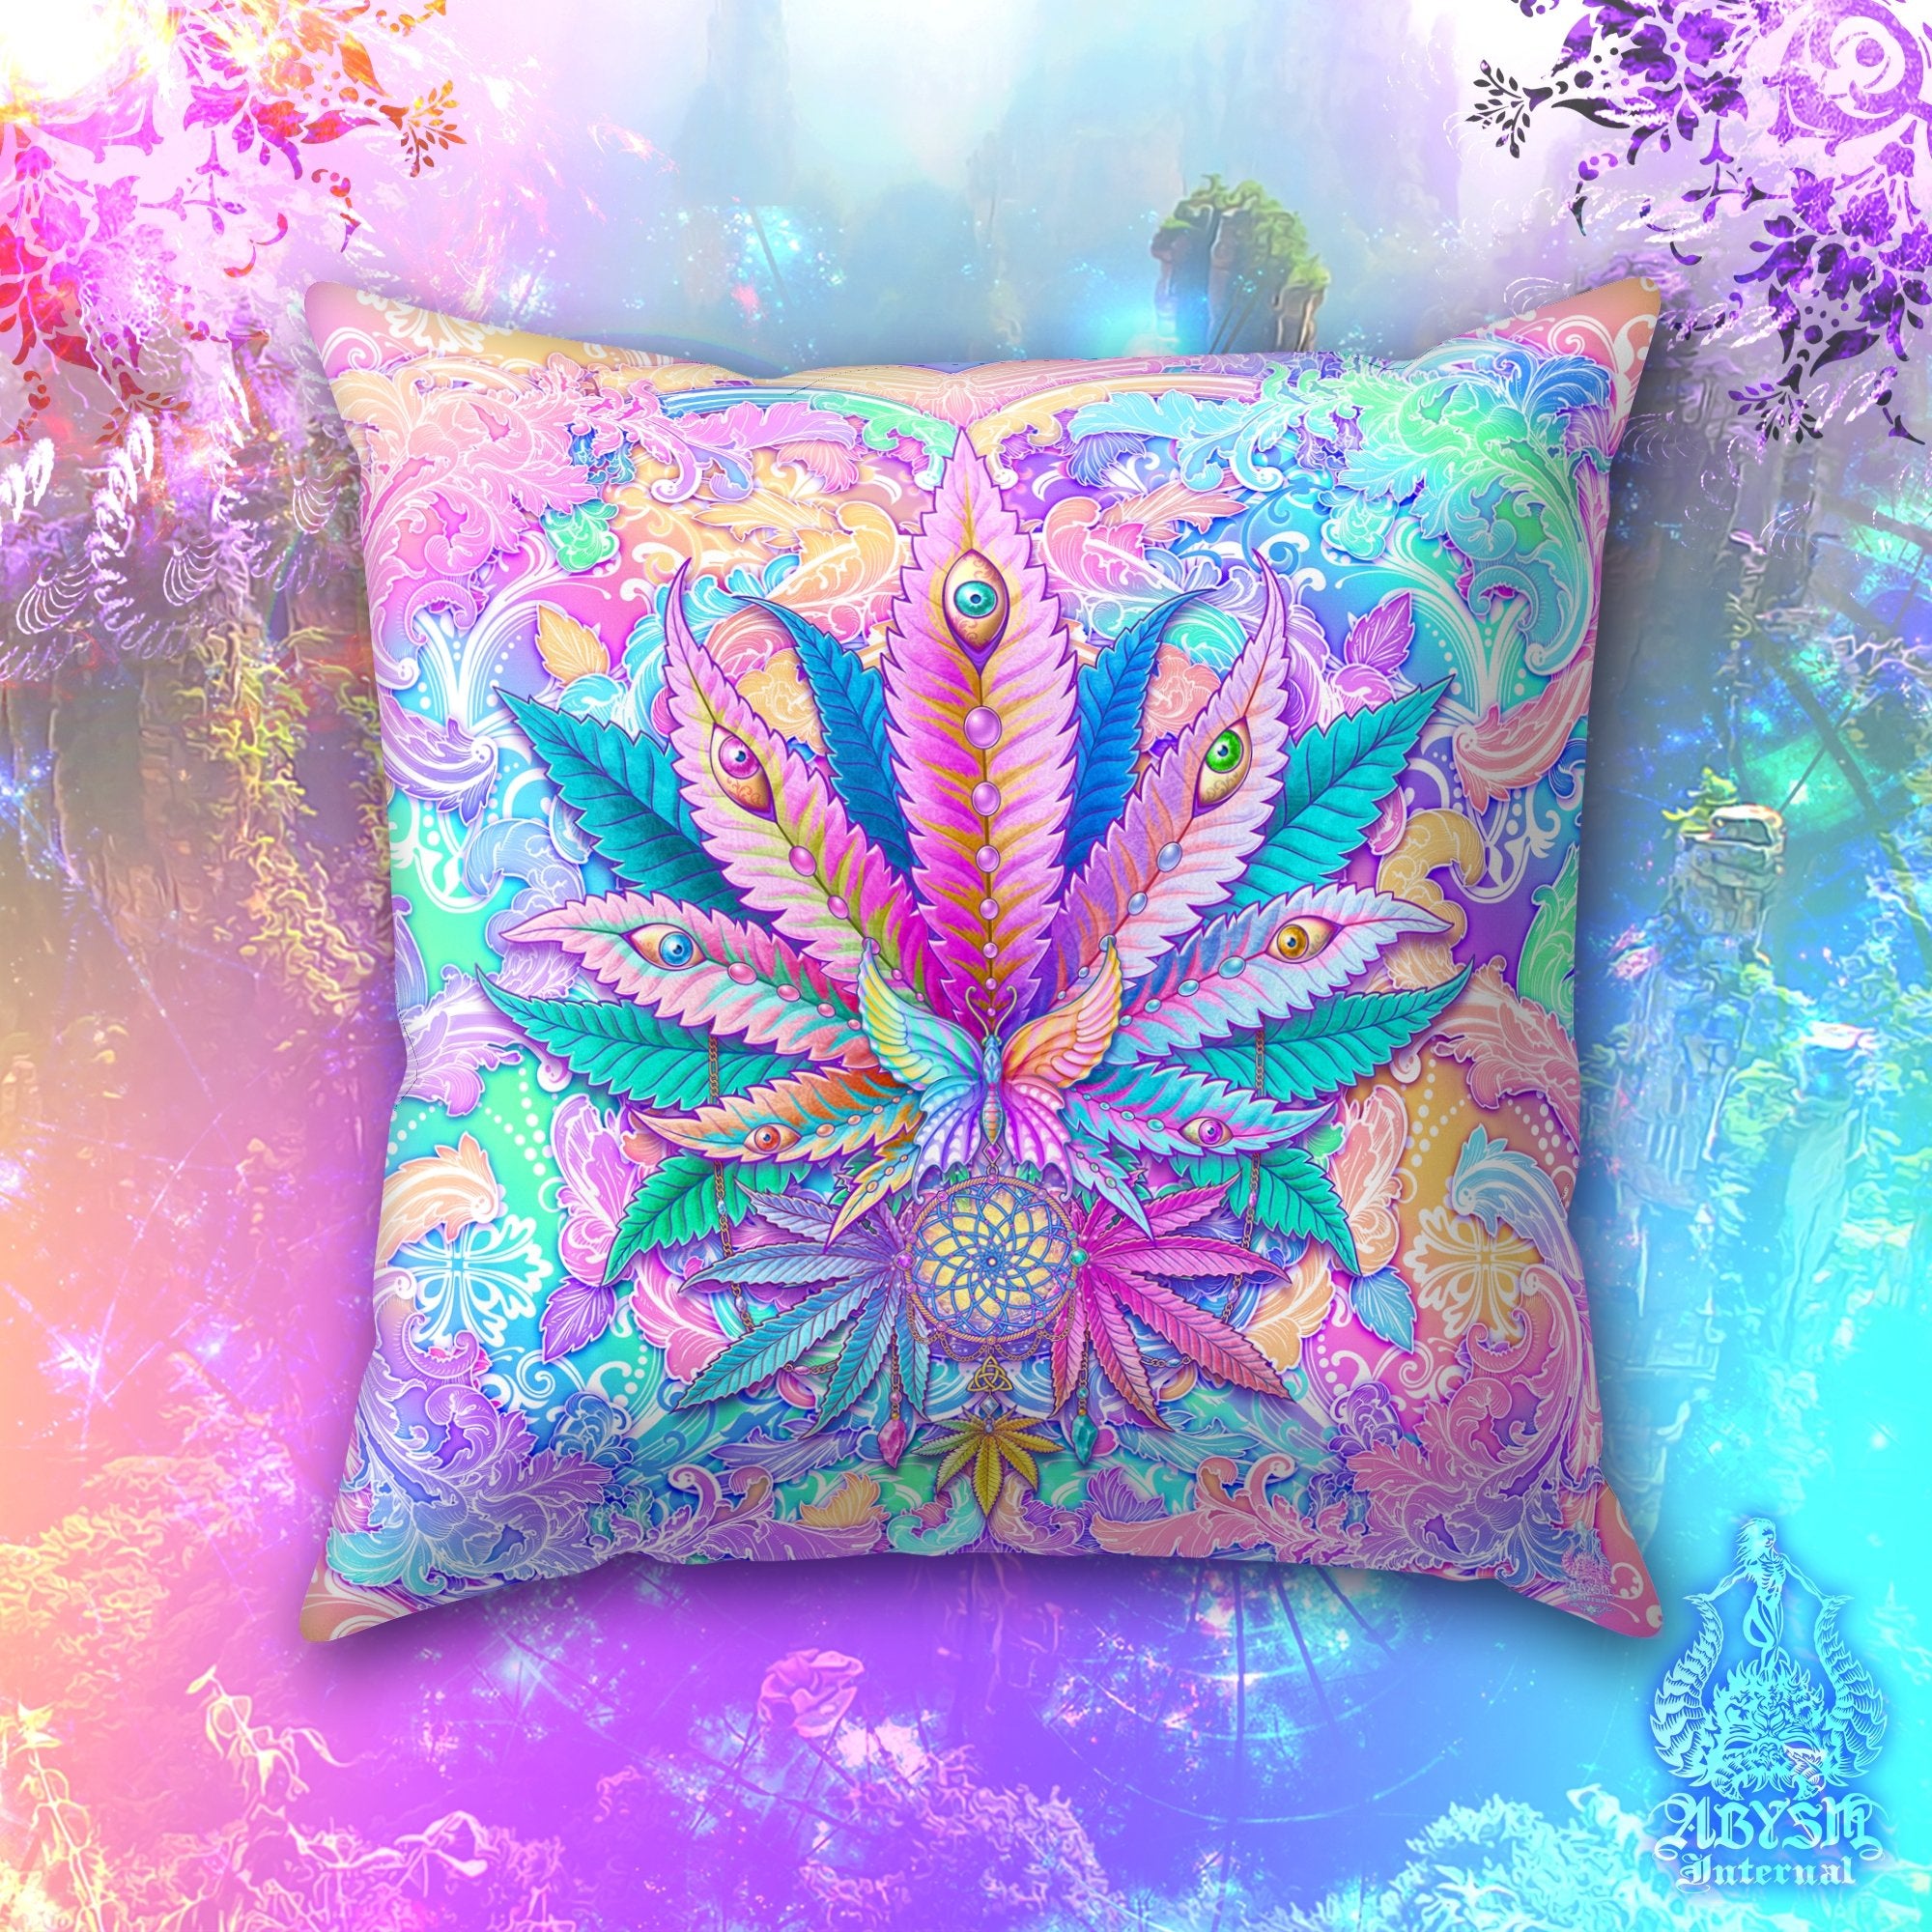 Weed Throw Pillow, Cannabis Shop Decor, Aesthetic Decorative Accent Cushion, Psychedelic Room Decor, Pastel 420 Art Print - Abysm Internal